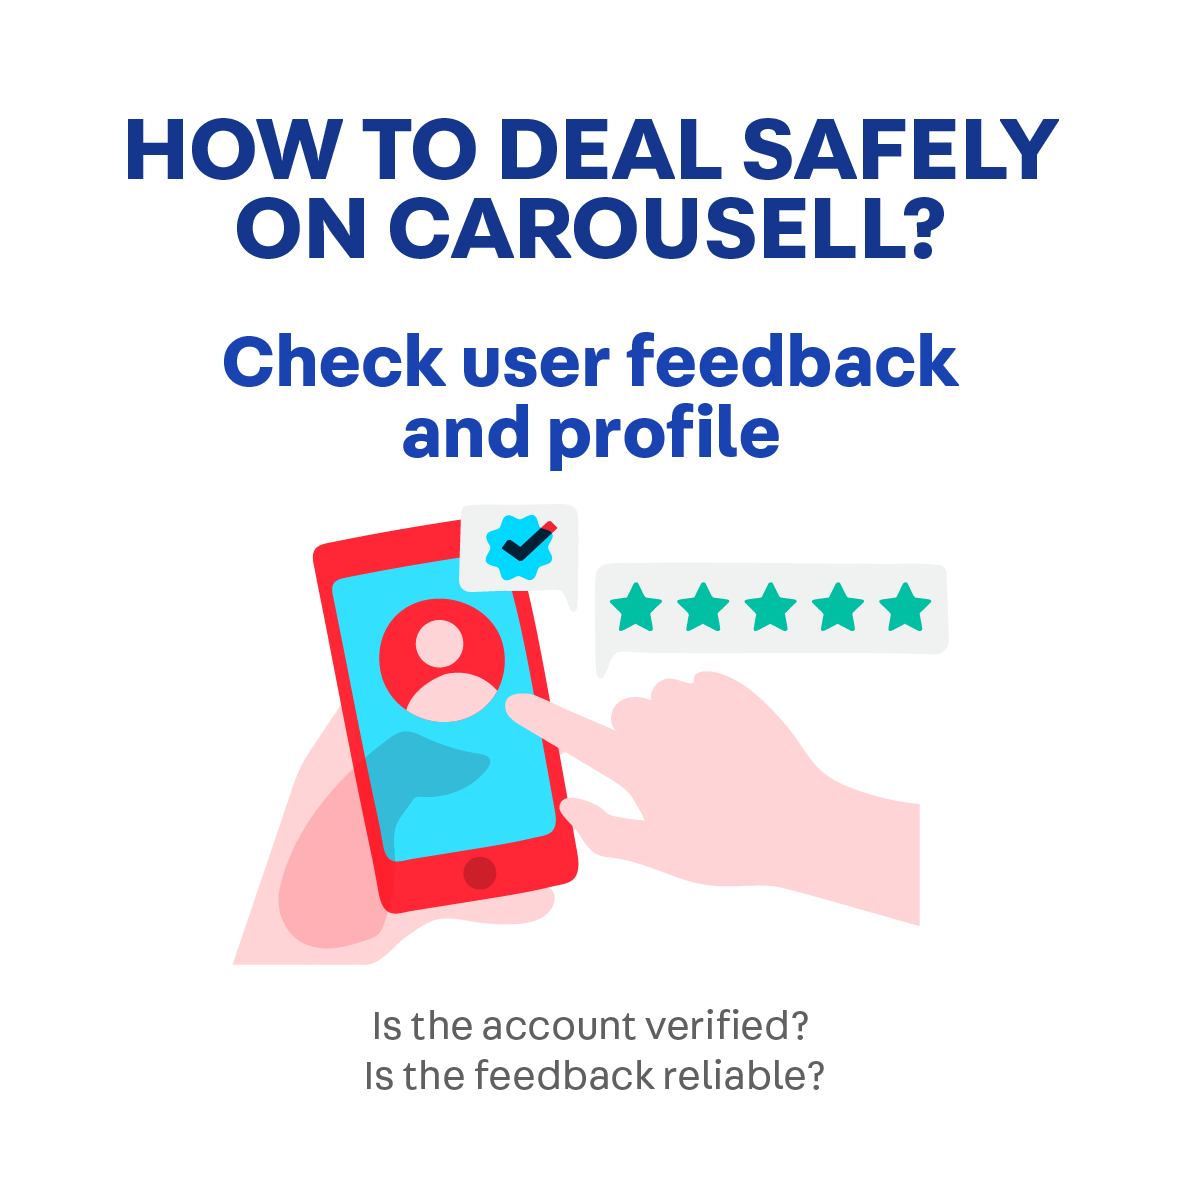 HelpCentre_How-to-deal-safely-on-Carousell_EN-1.png